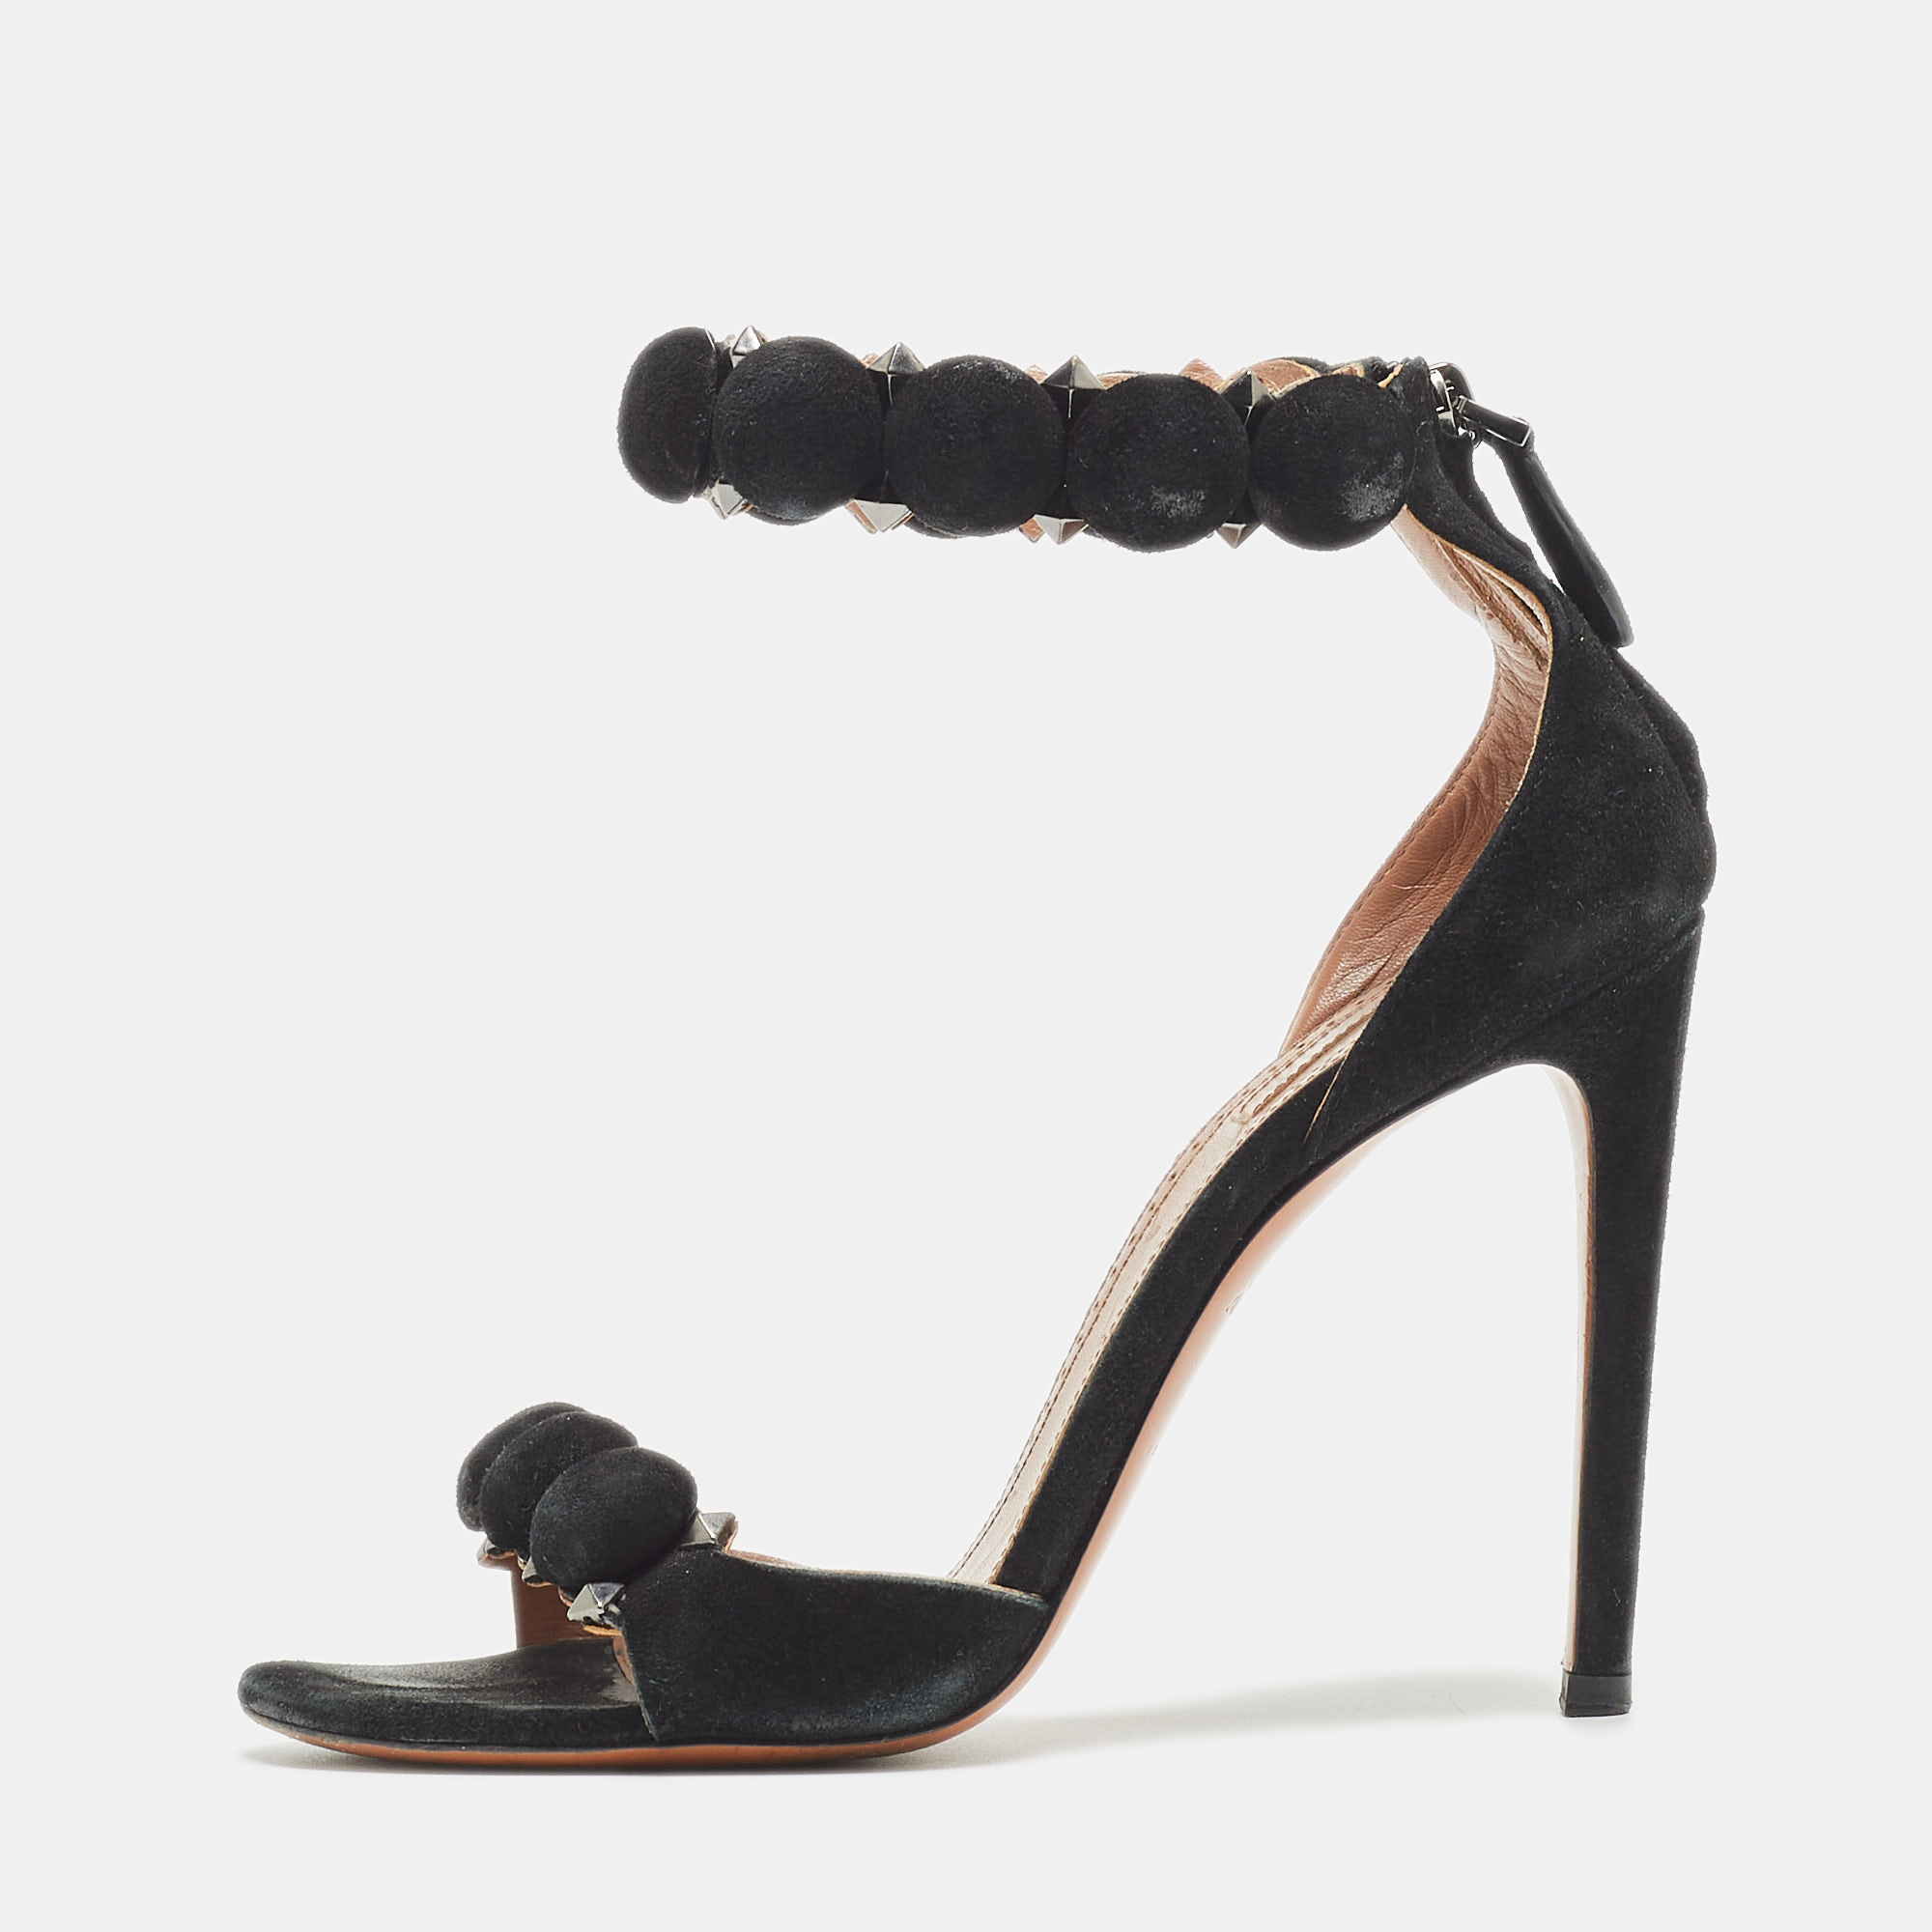 Alaia Black Suede Bombe Ankle Strap Sandals Size